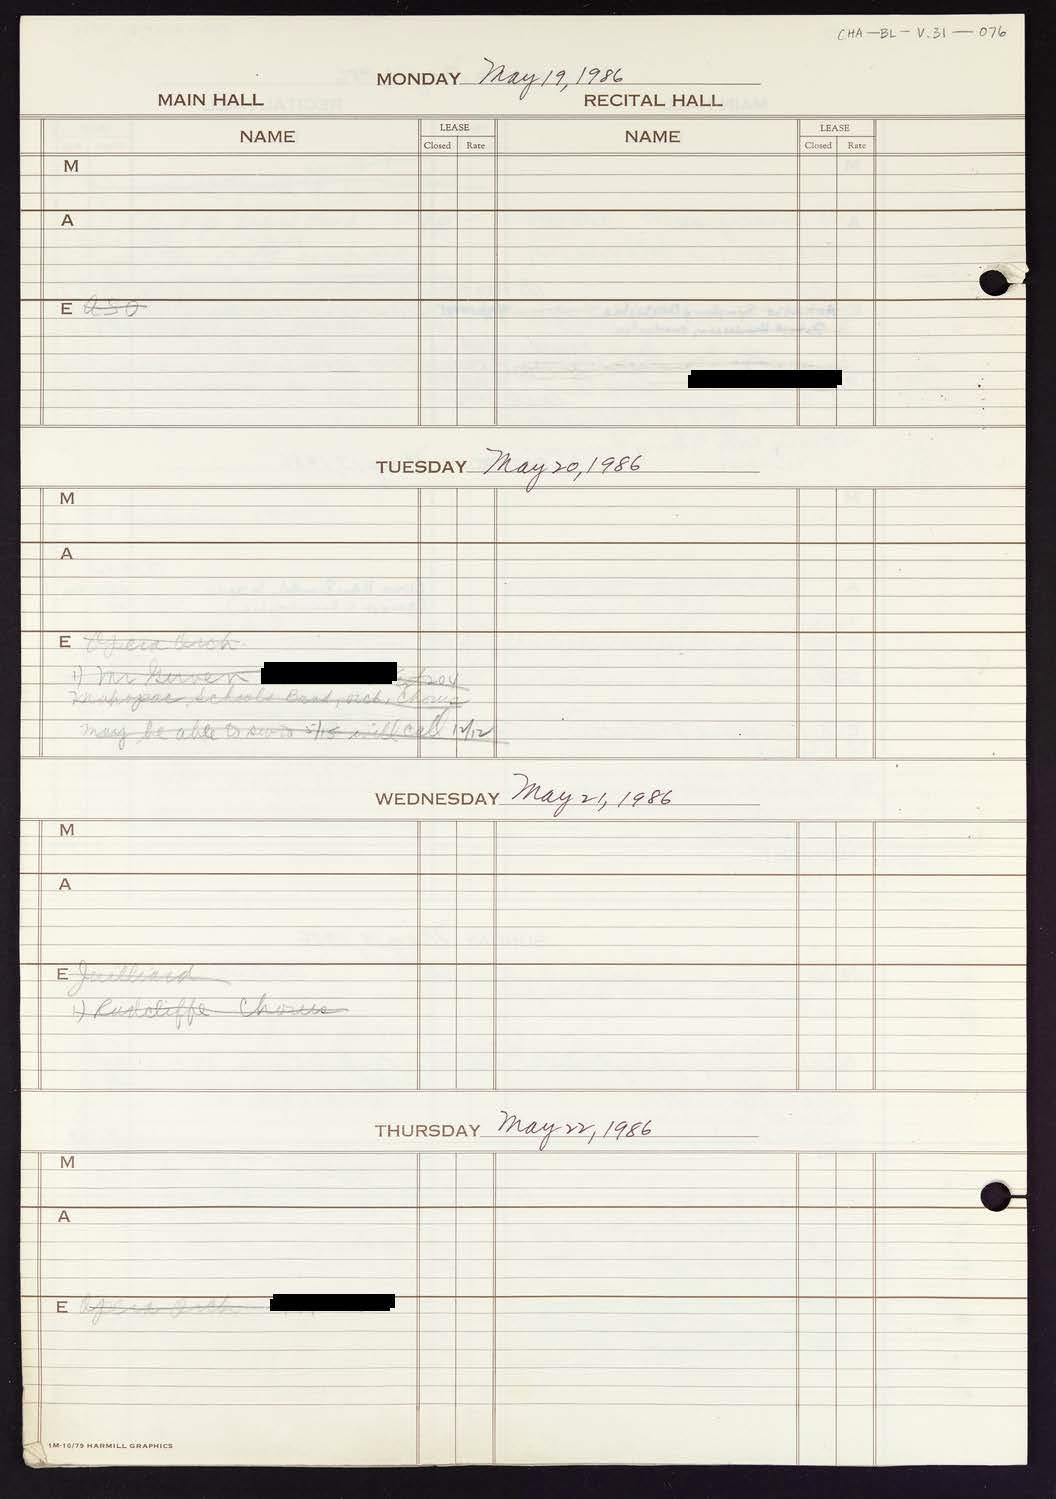 Carnegie Hall Booking Ledger, volume 31, page 76